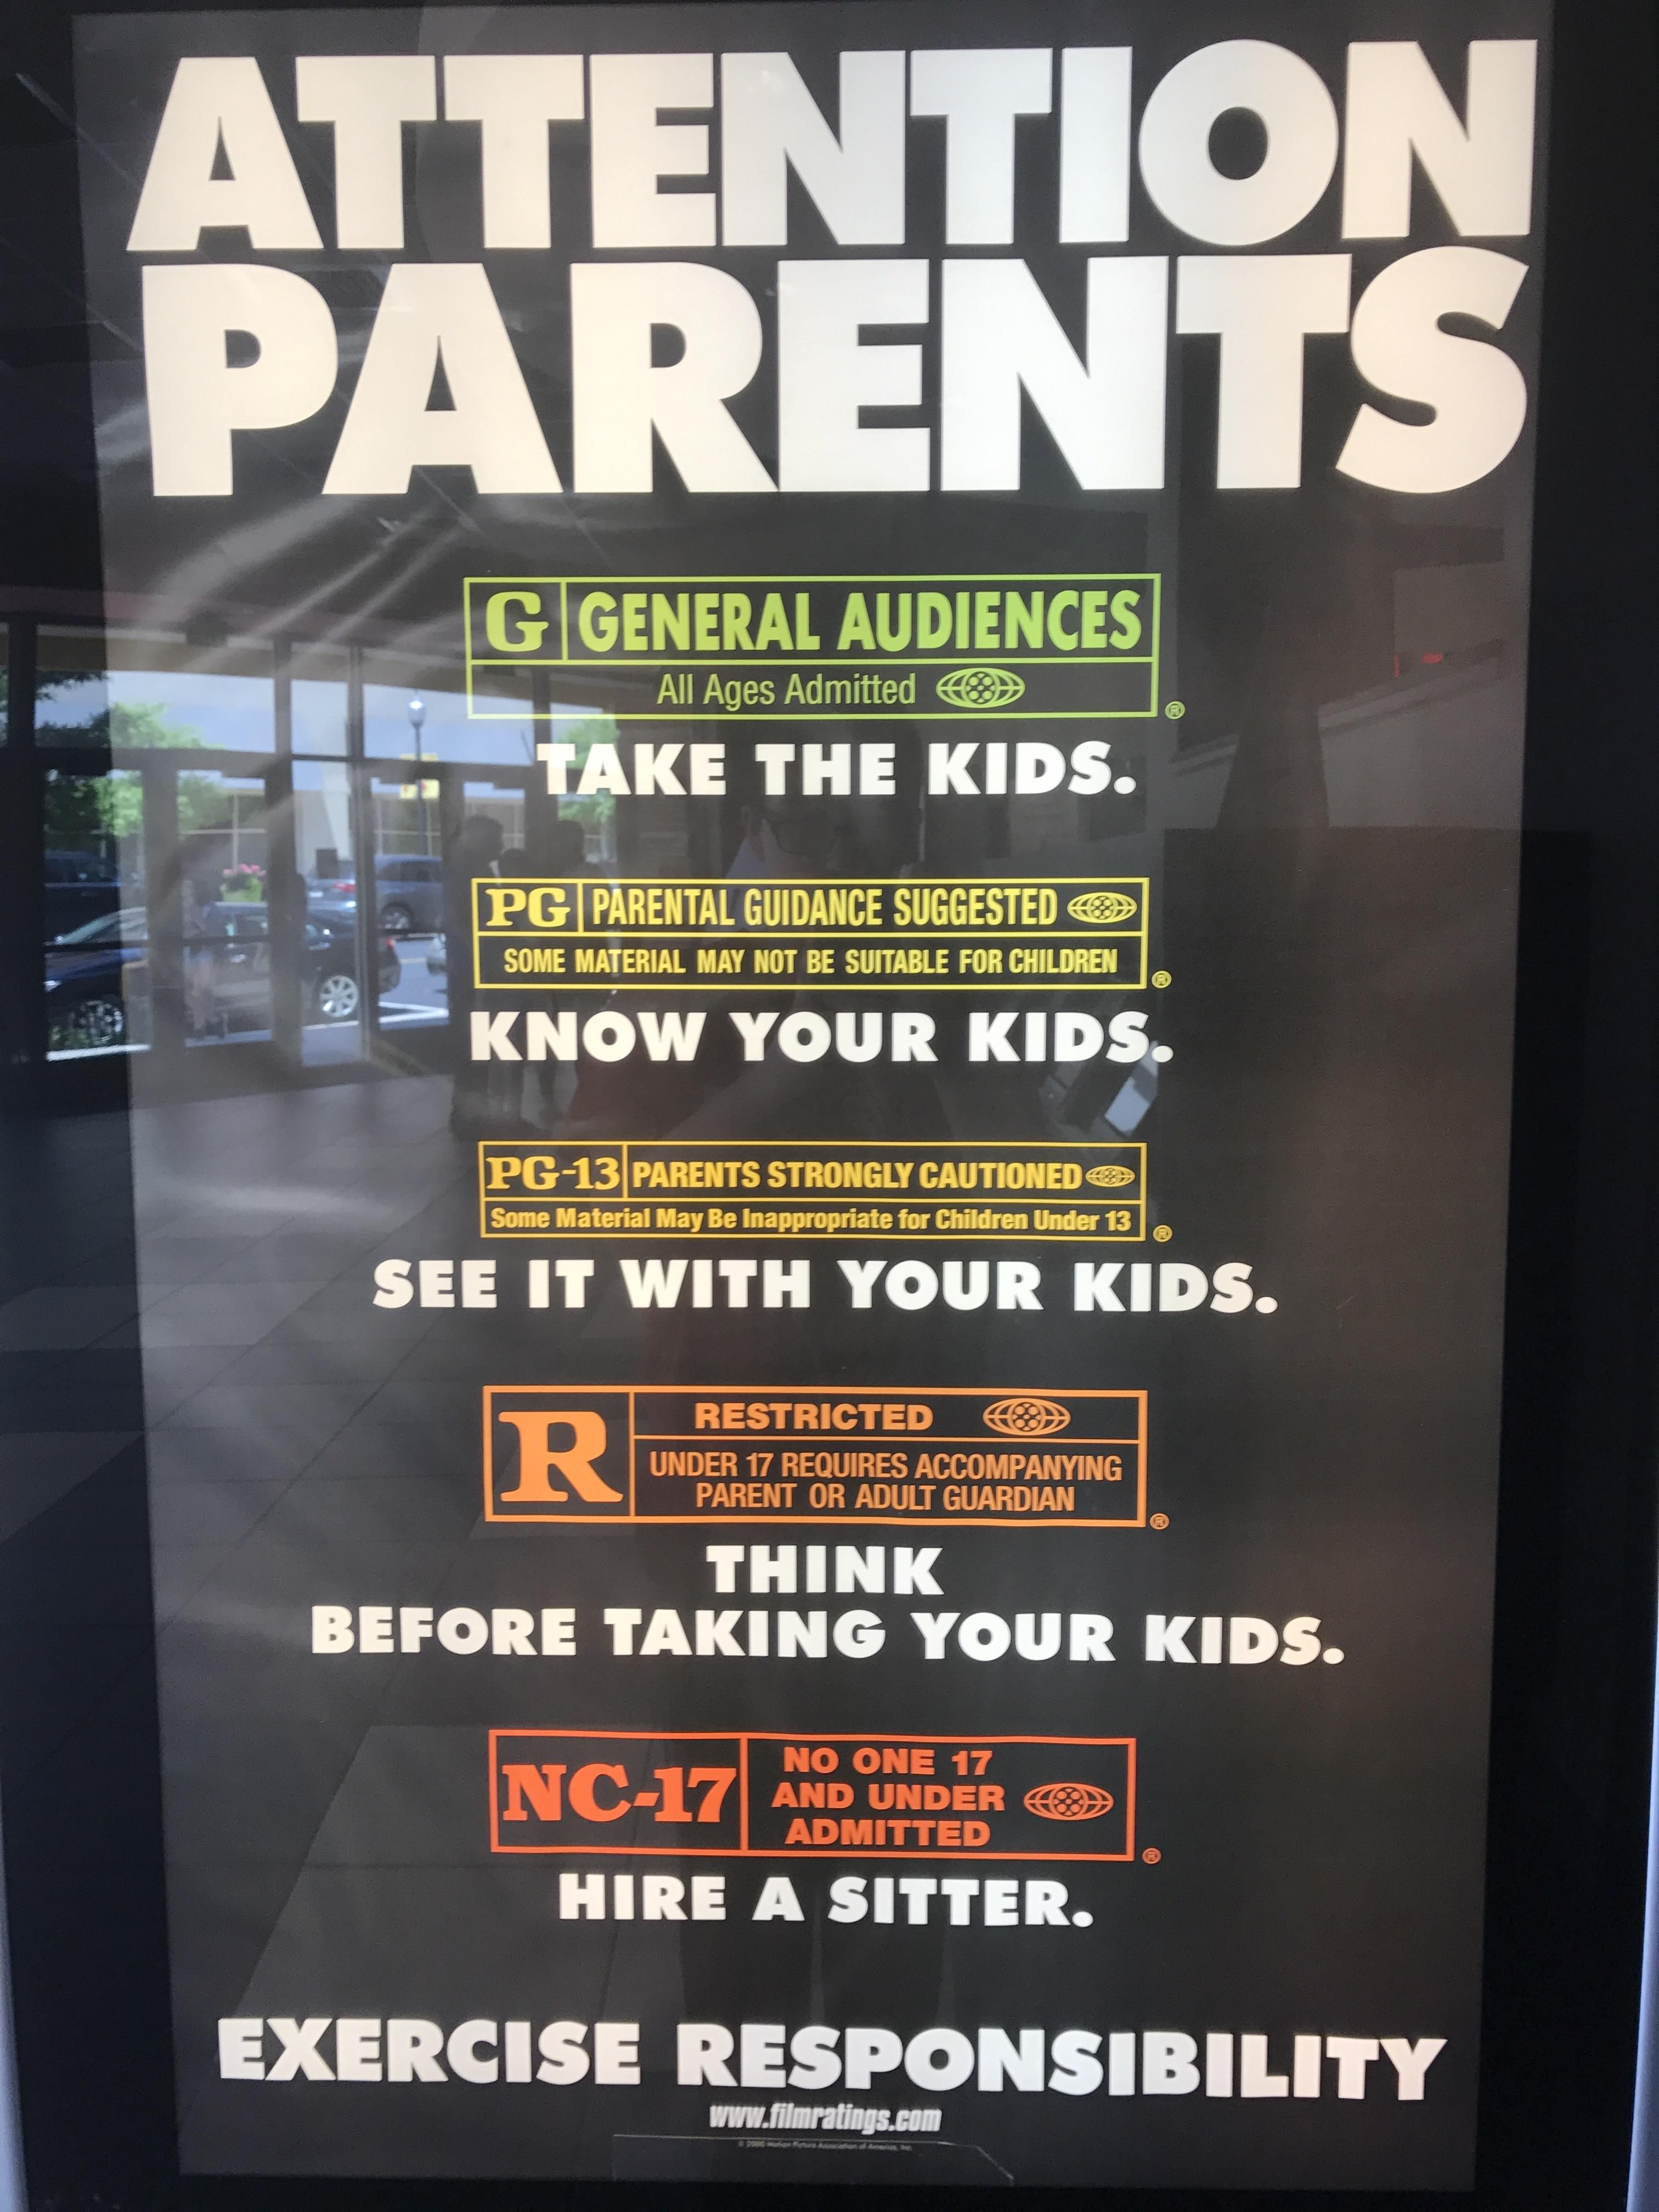 This poster in a movie theatre.